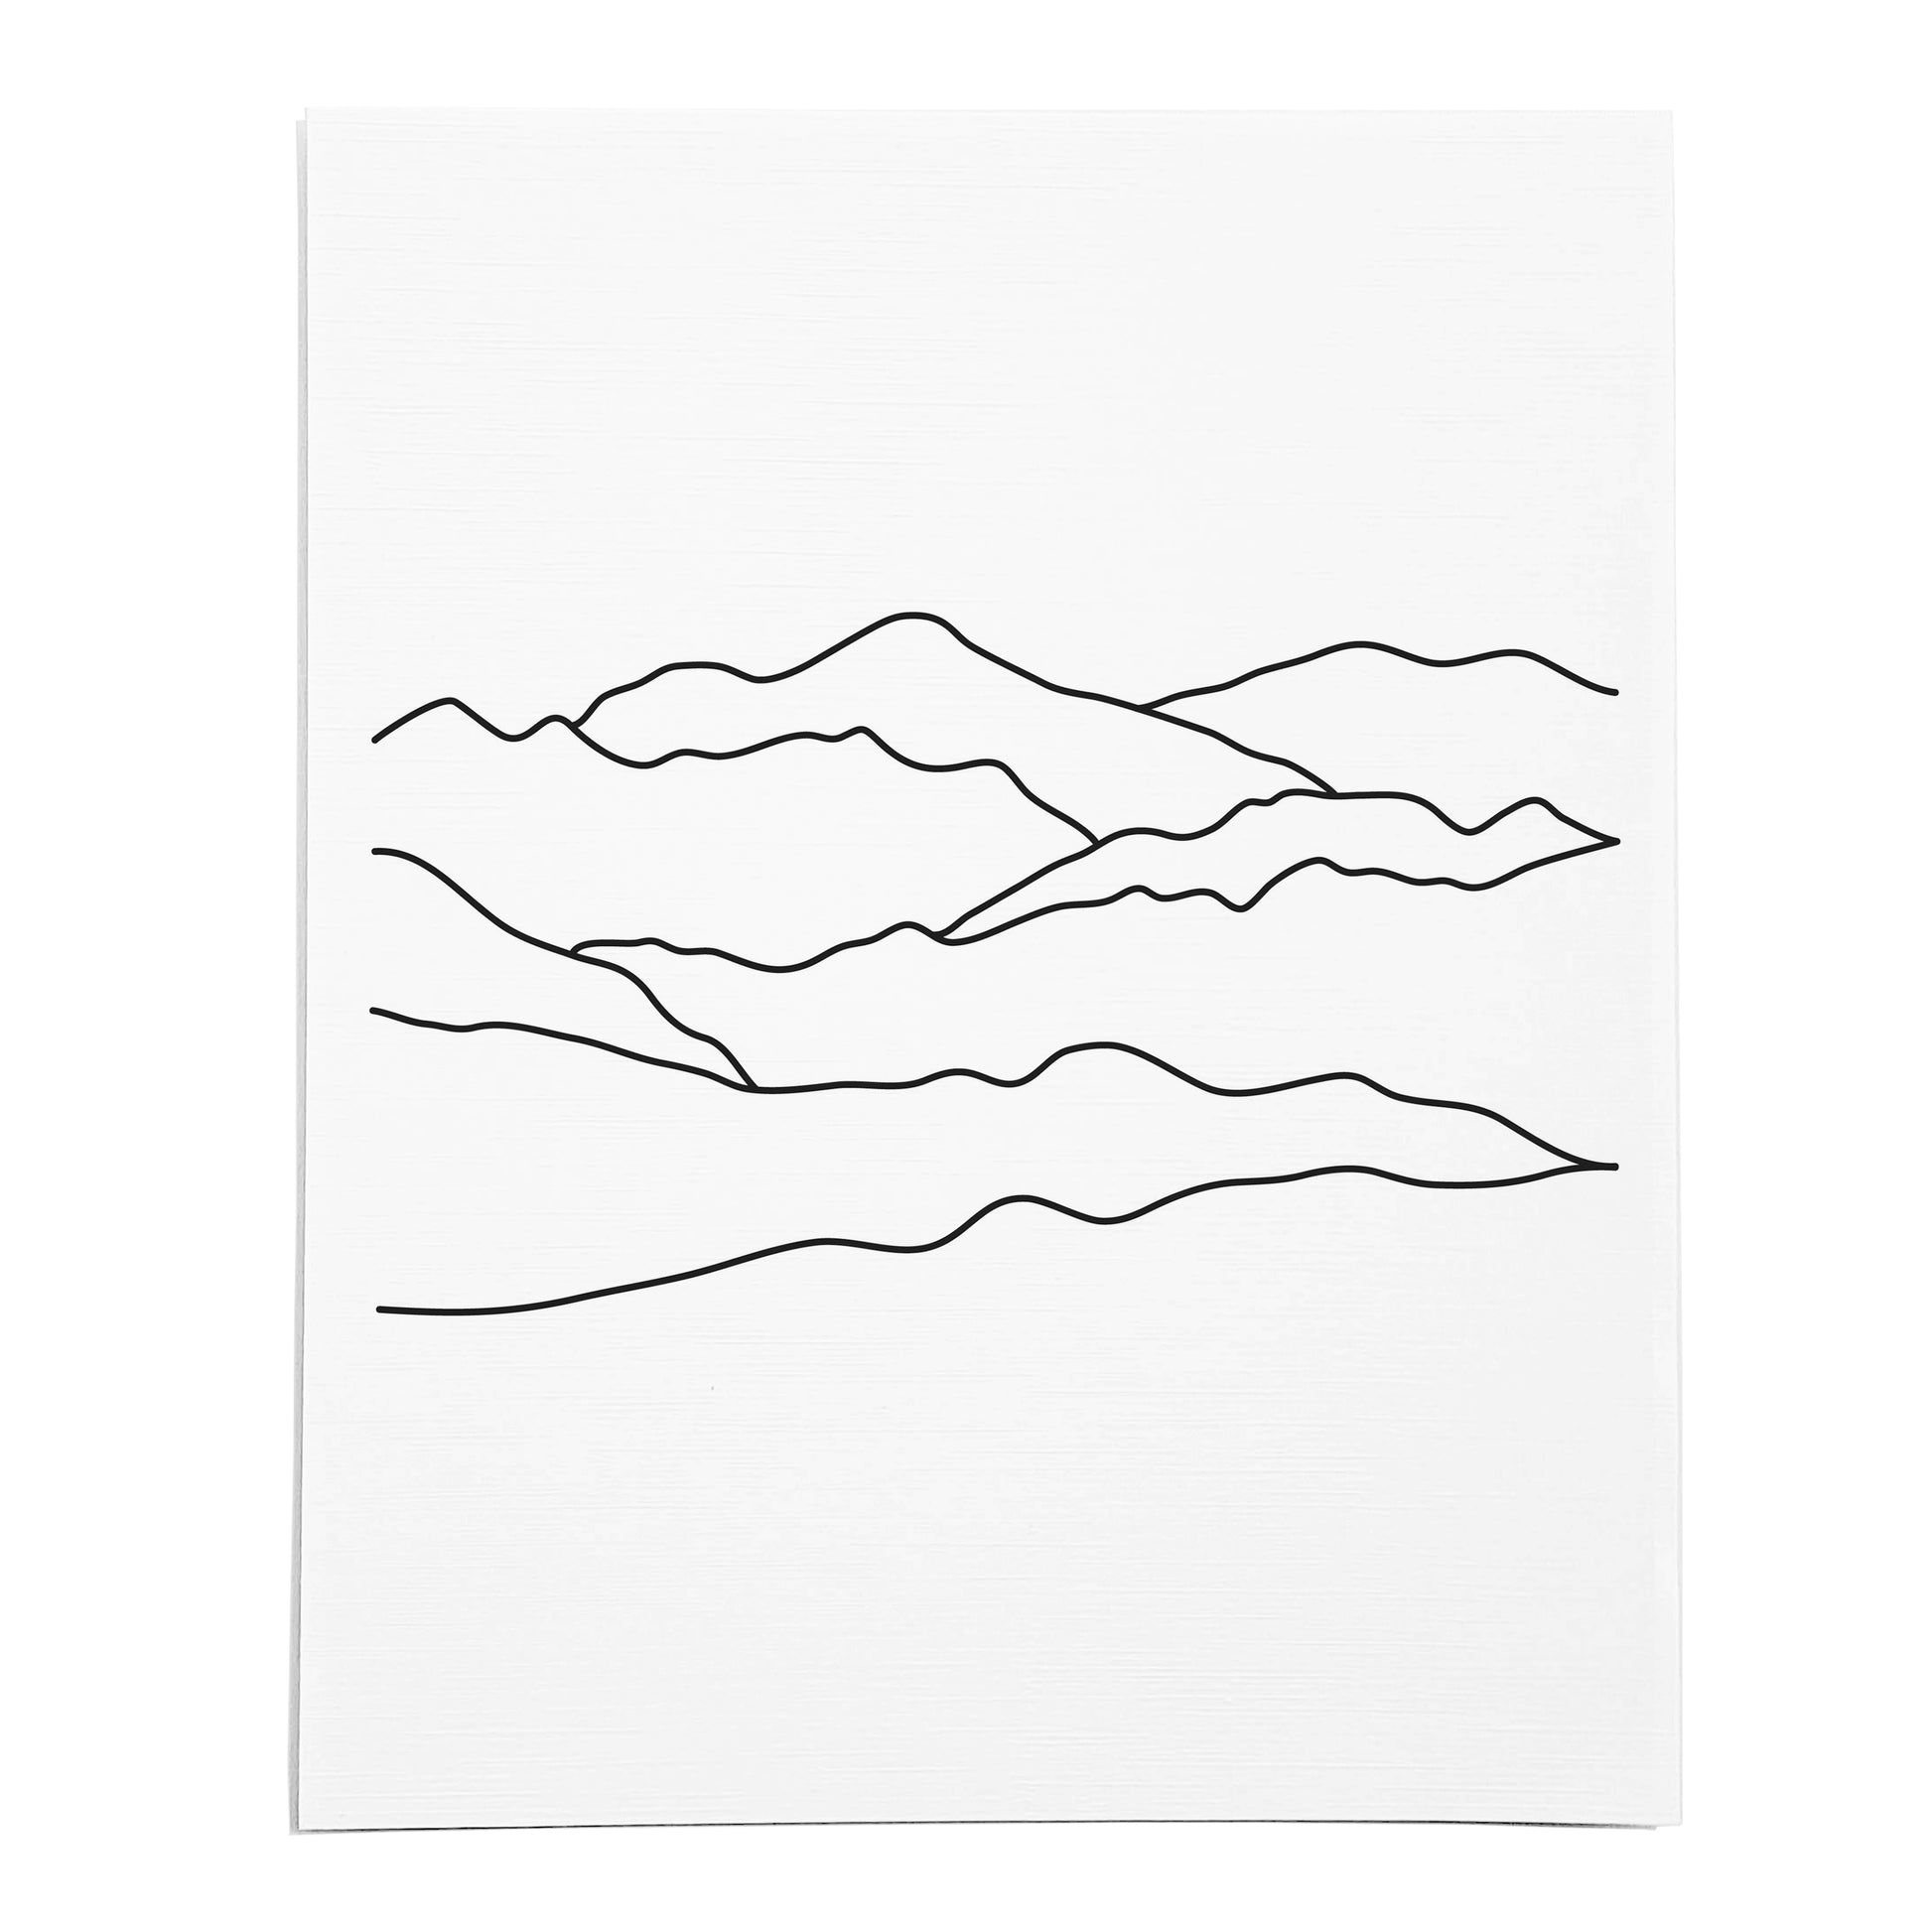 An art print featuring a line drawing of a Mountain Range on white linen paper